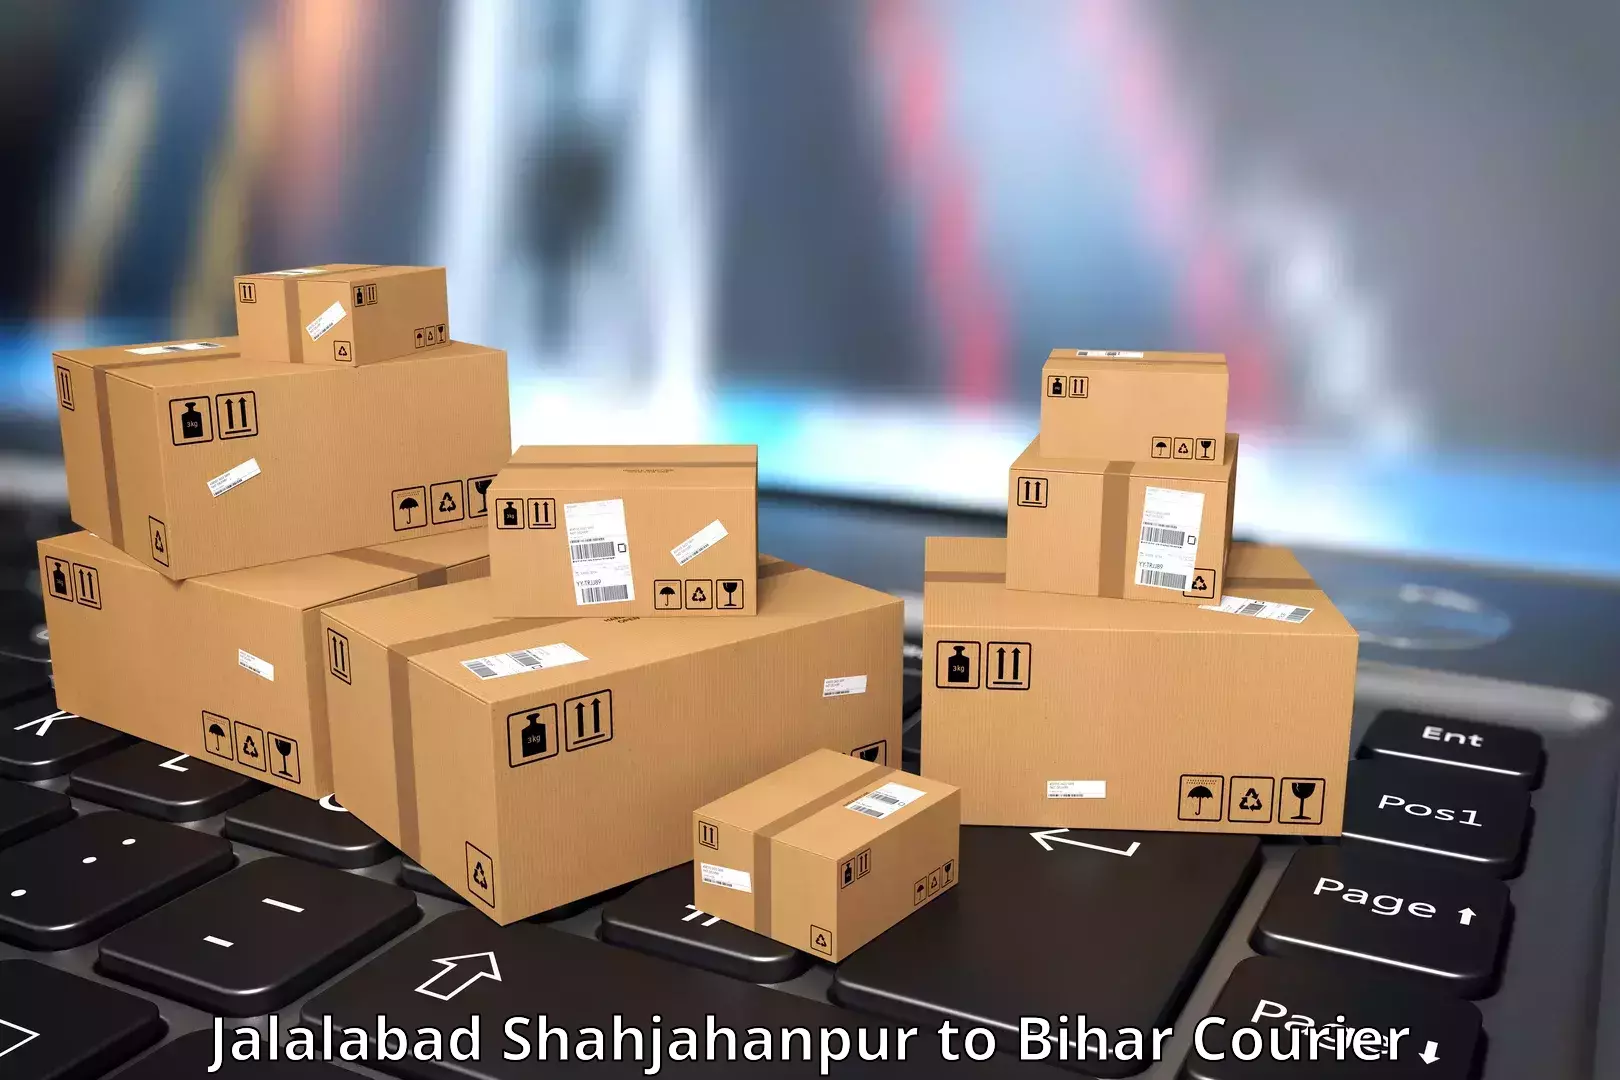 24-hour delivery options Jalalabad Shahjahanpur to Dehri